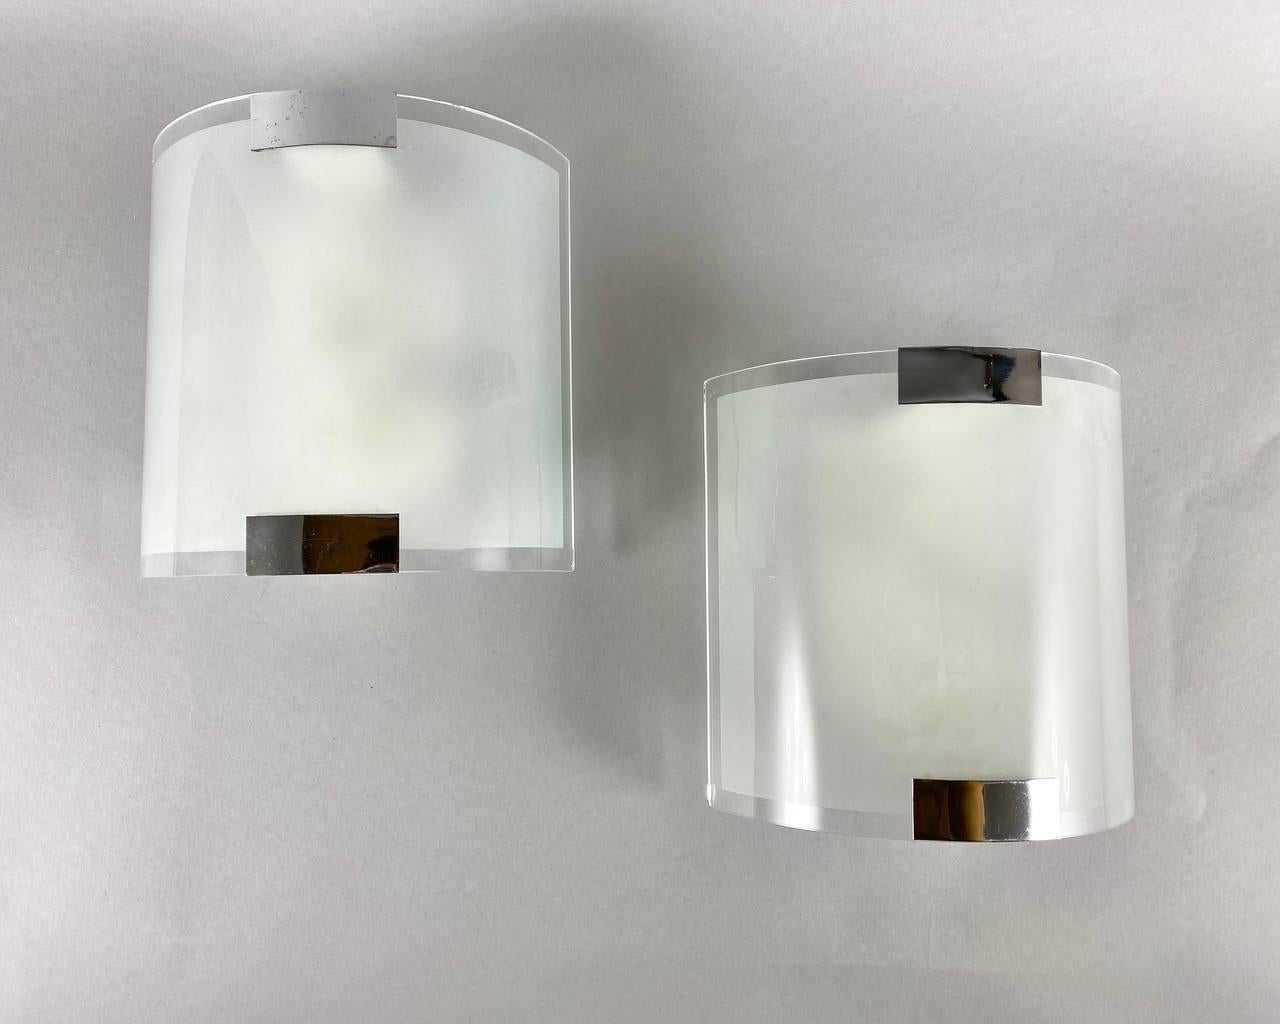 20th Century Modern Paired Wall Sconces by Trio Lighting, Germany, 2009 For Sale